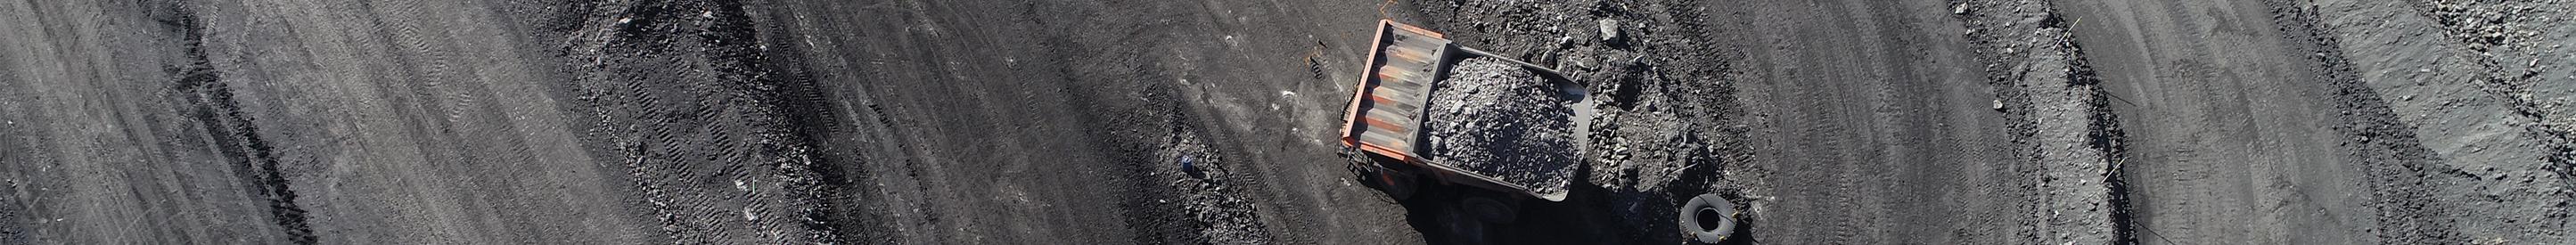 Aerial view of haul truck in precarious position at mine